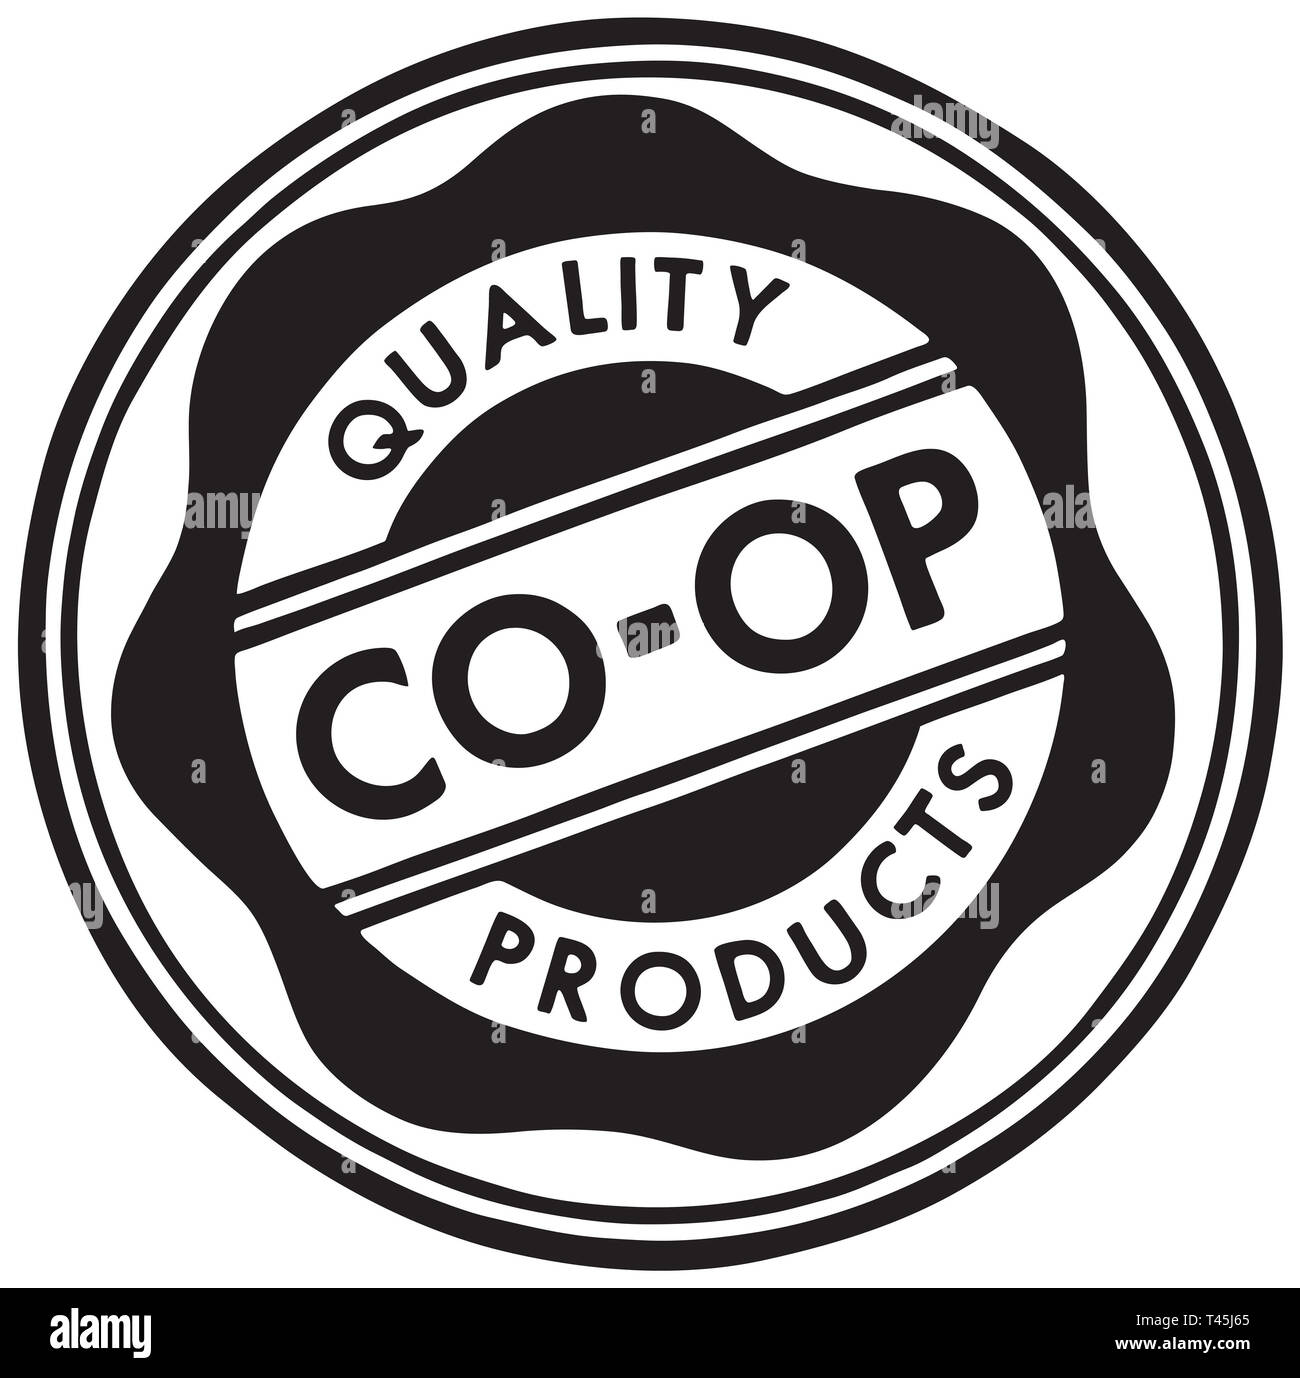 Quality Coop Products Stock Photo